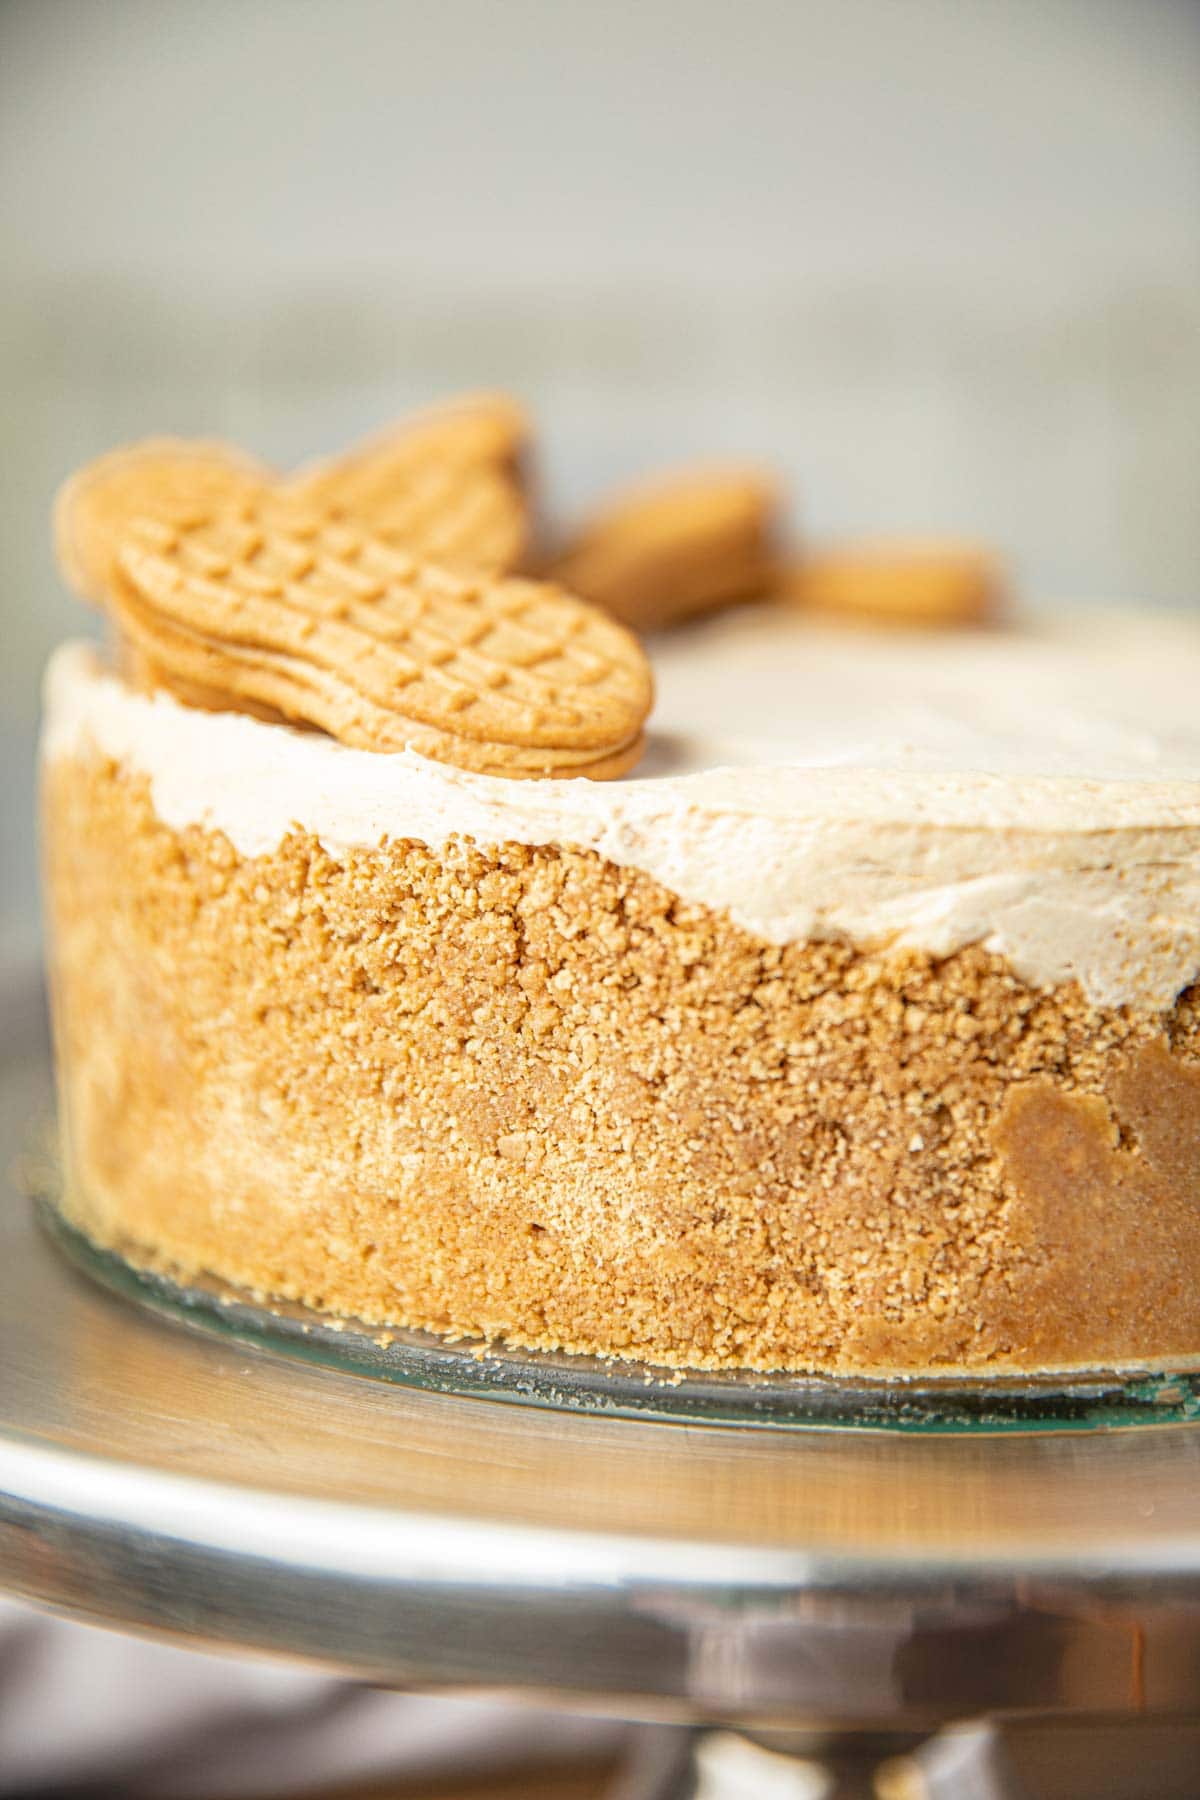 Whole Peanut Butter Pie with Nutter Butter Crust on Cake Stand